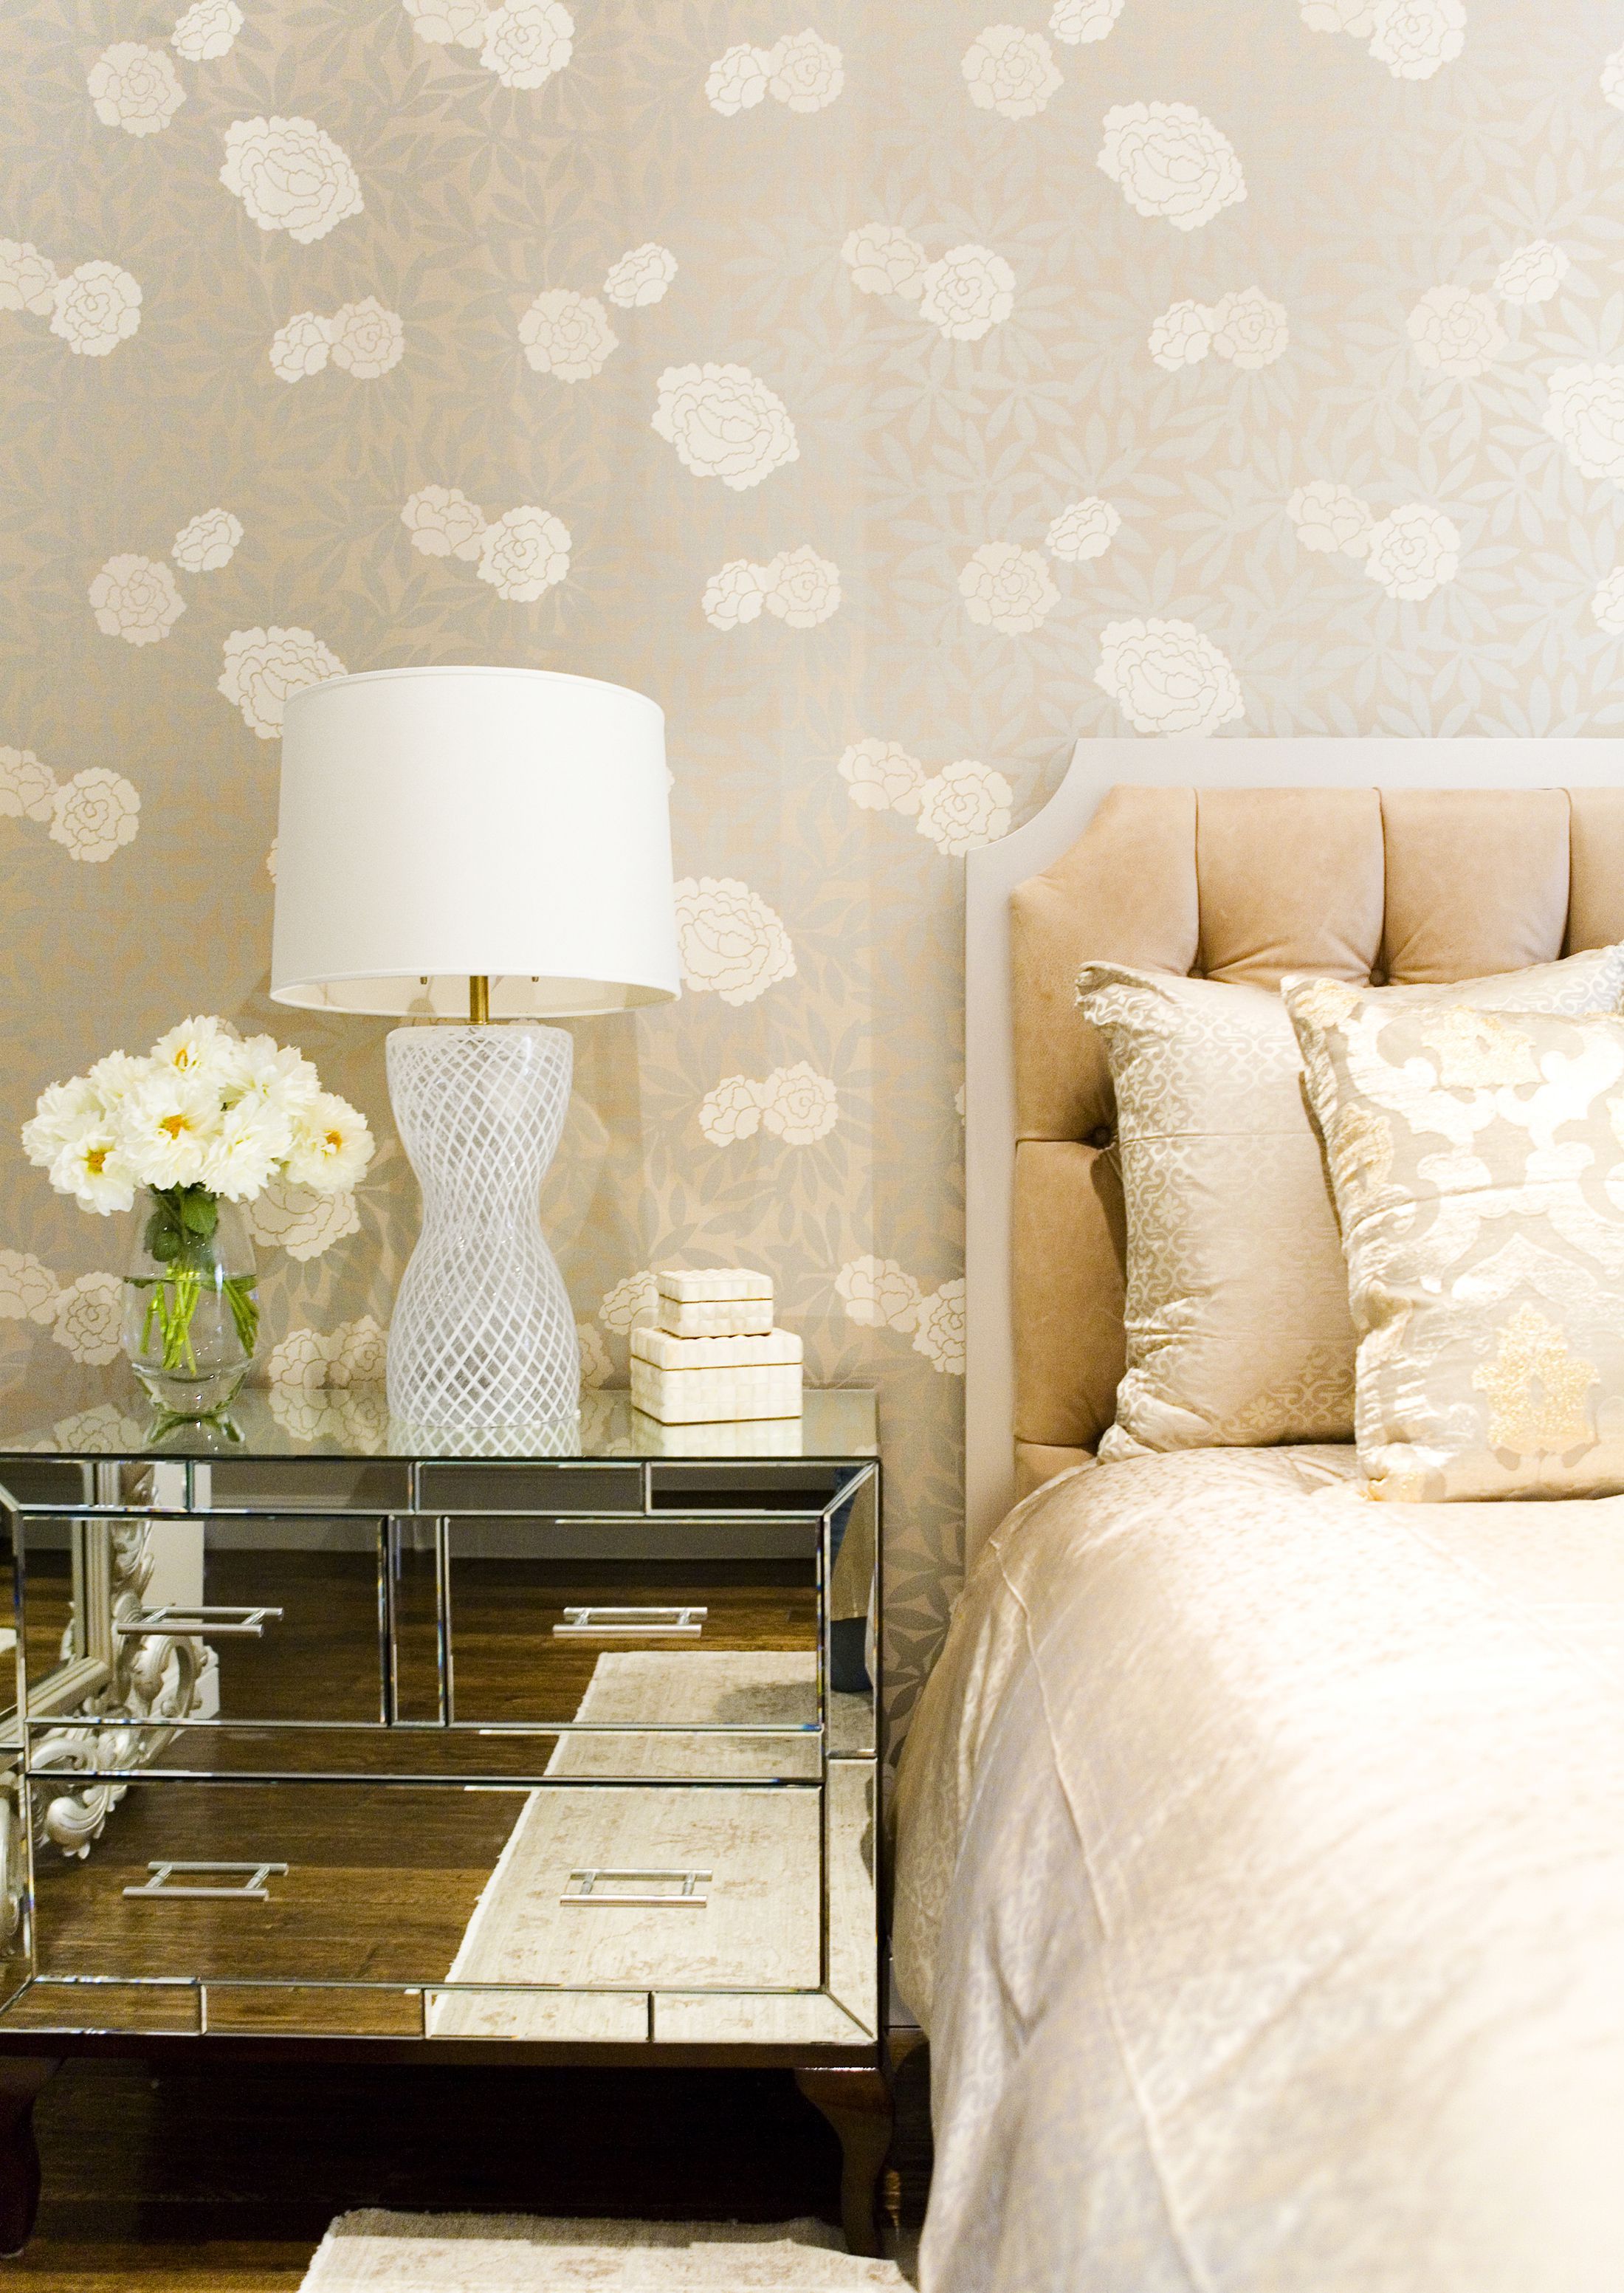 5 Unique Wallpaper Patterns For Bedrooms That Make A Statement